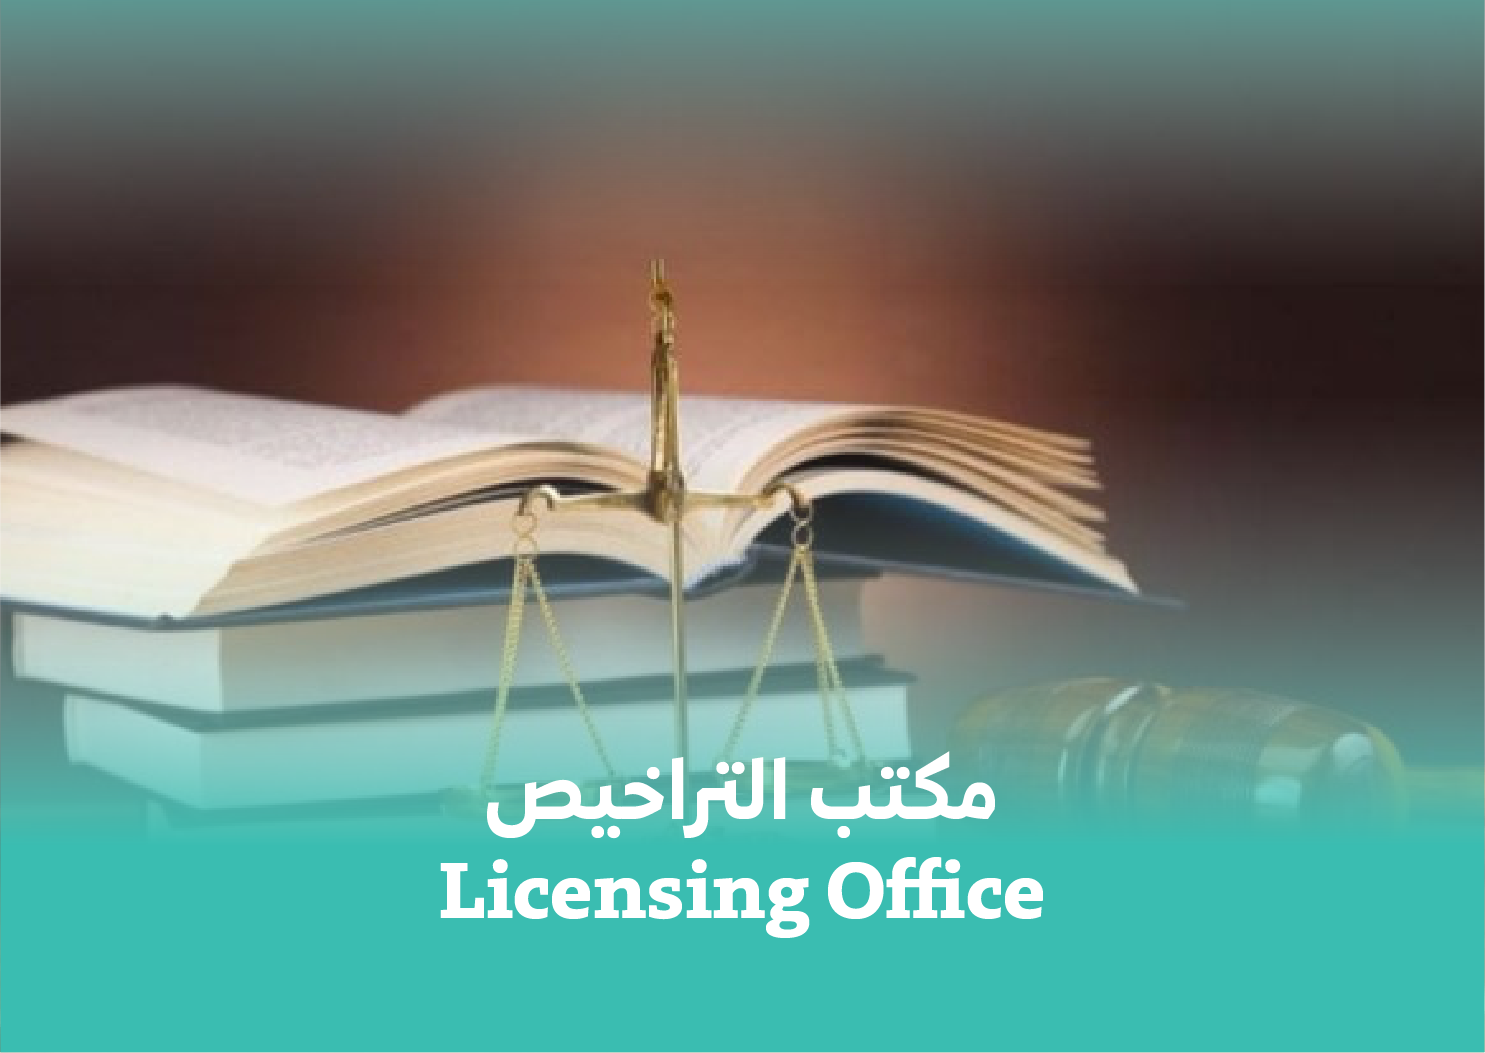 Licensing Office